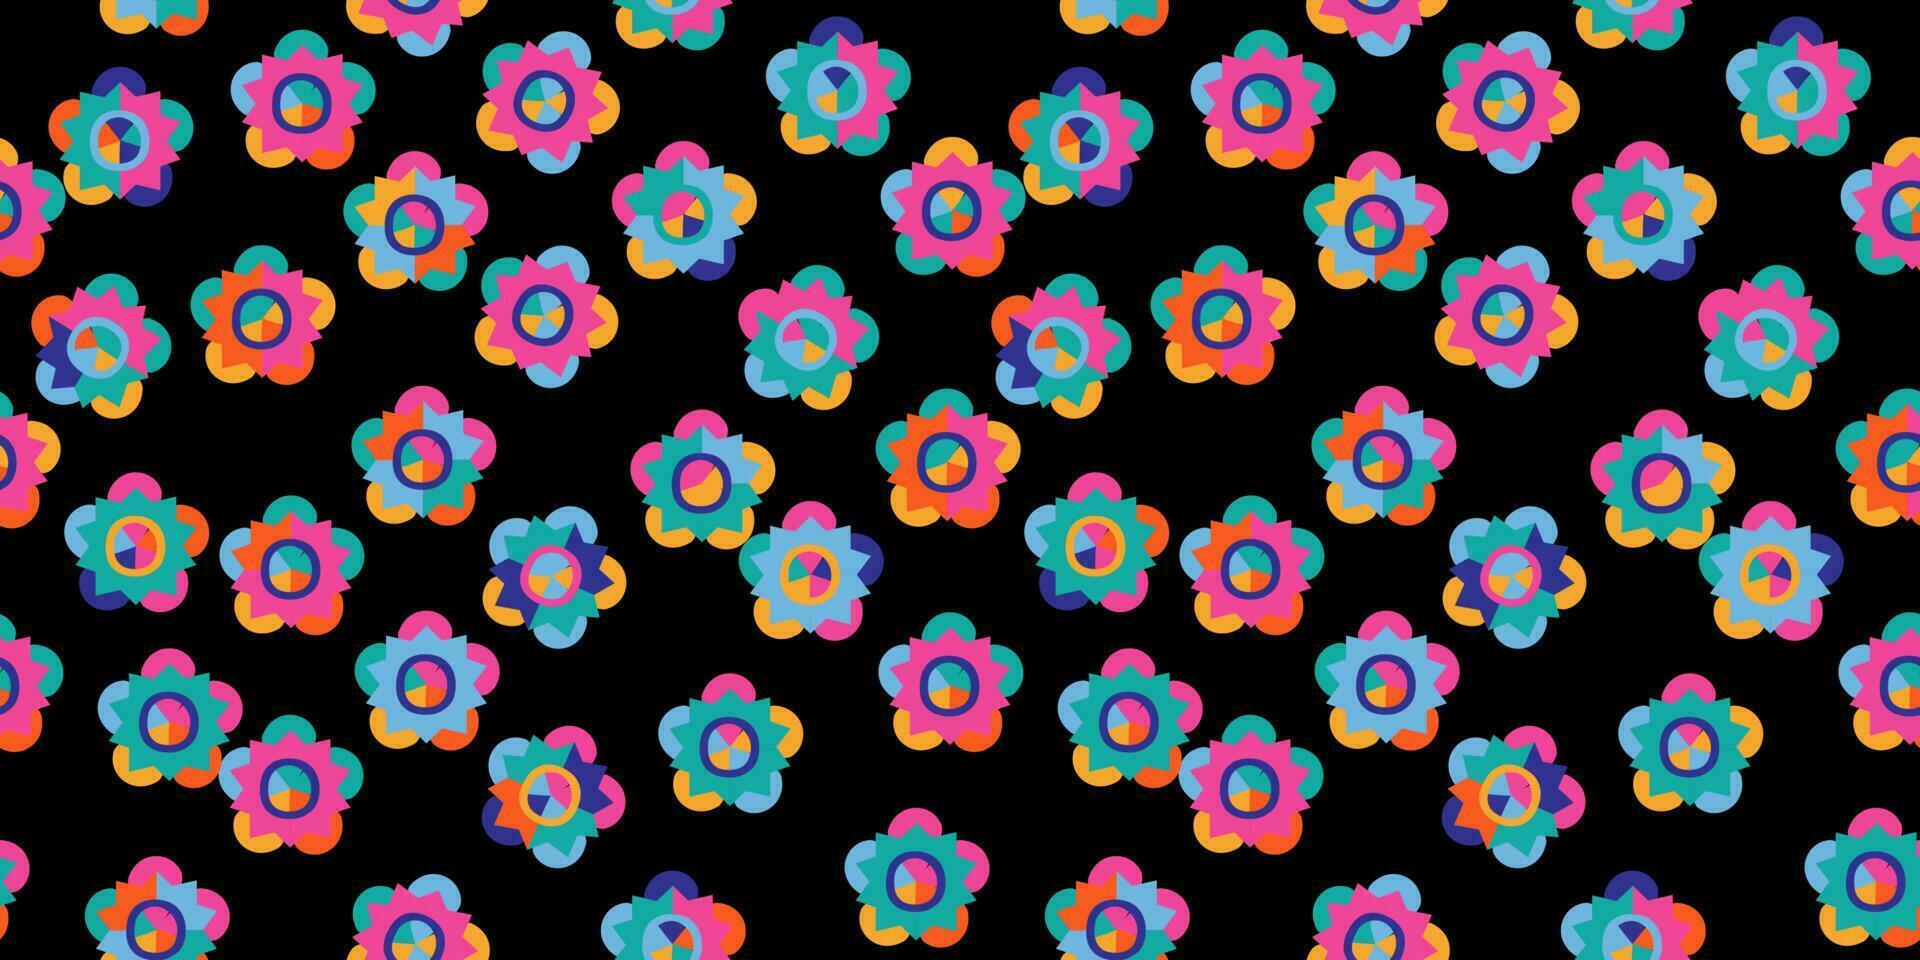 Retro geometric flowers seamless patterns for fabric, textiles, clothing, wrapping paper, cover, banner, interior decor, backgrounds. vector